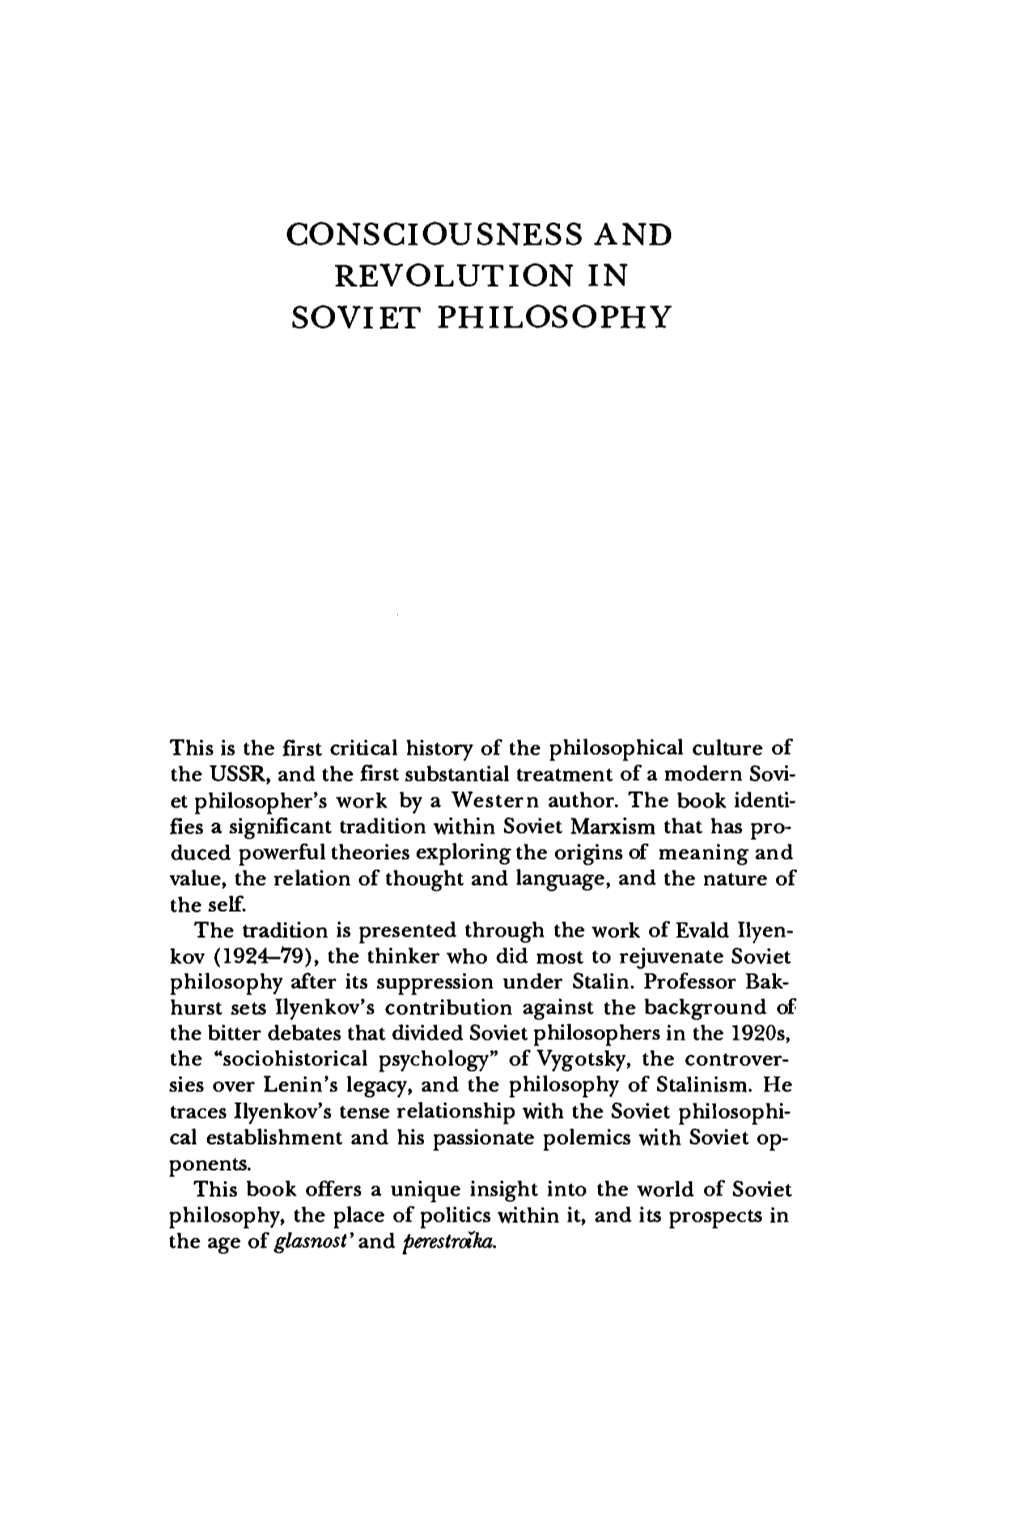 Consciousness and Revolution in Soviet Philosophy